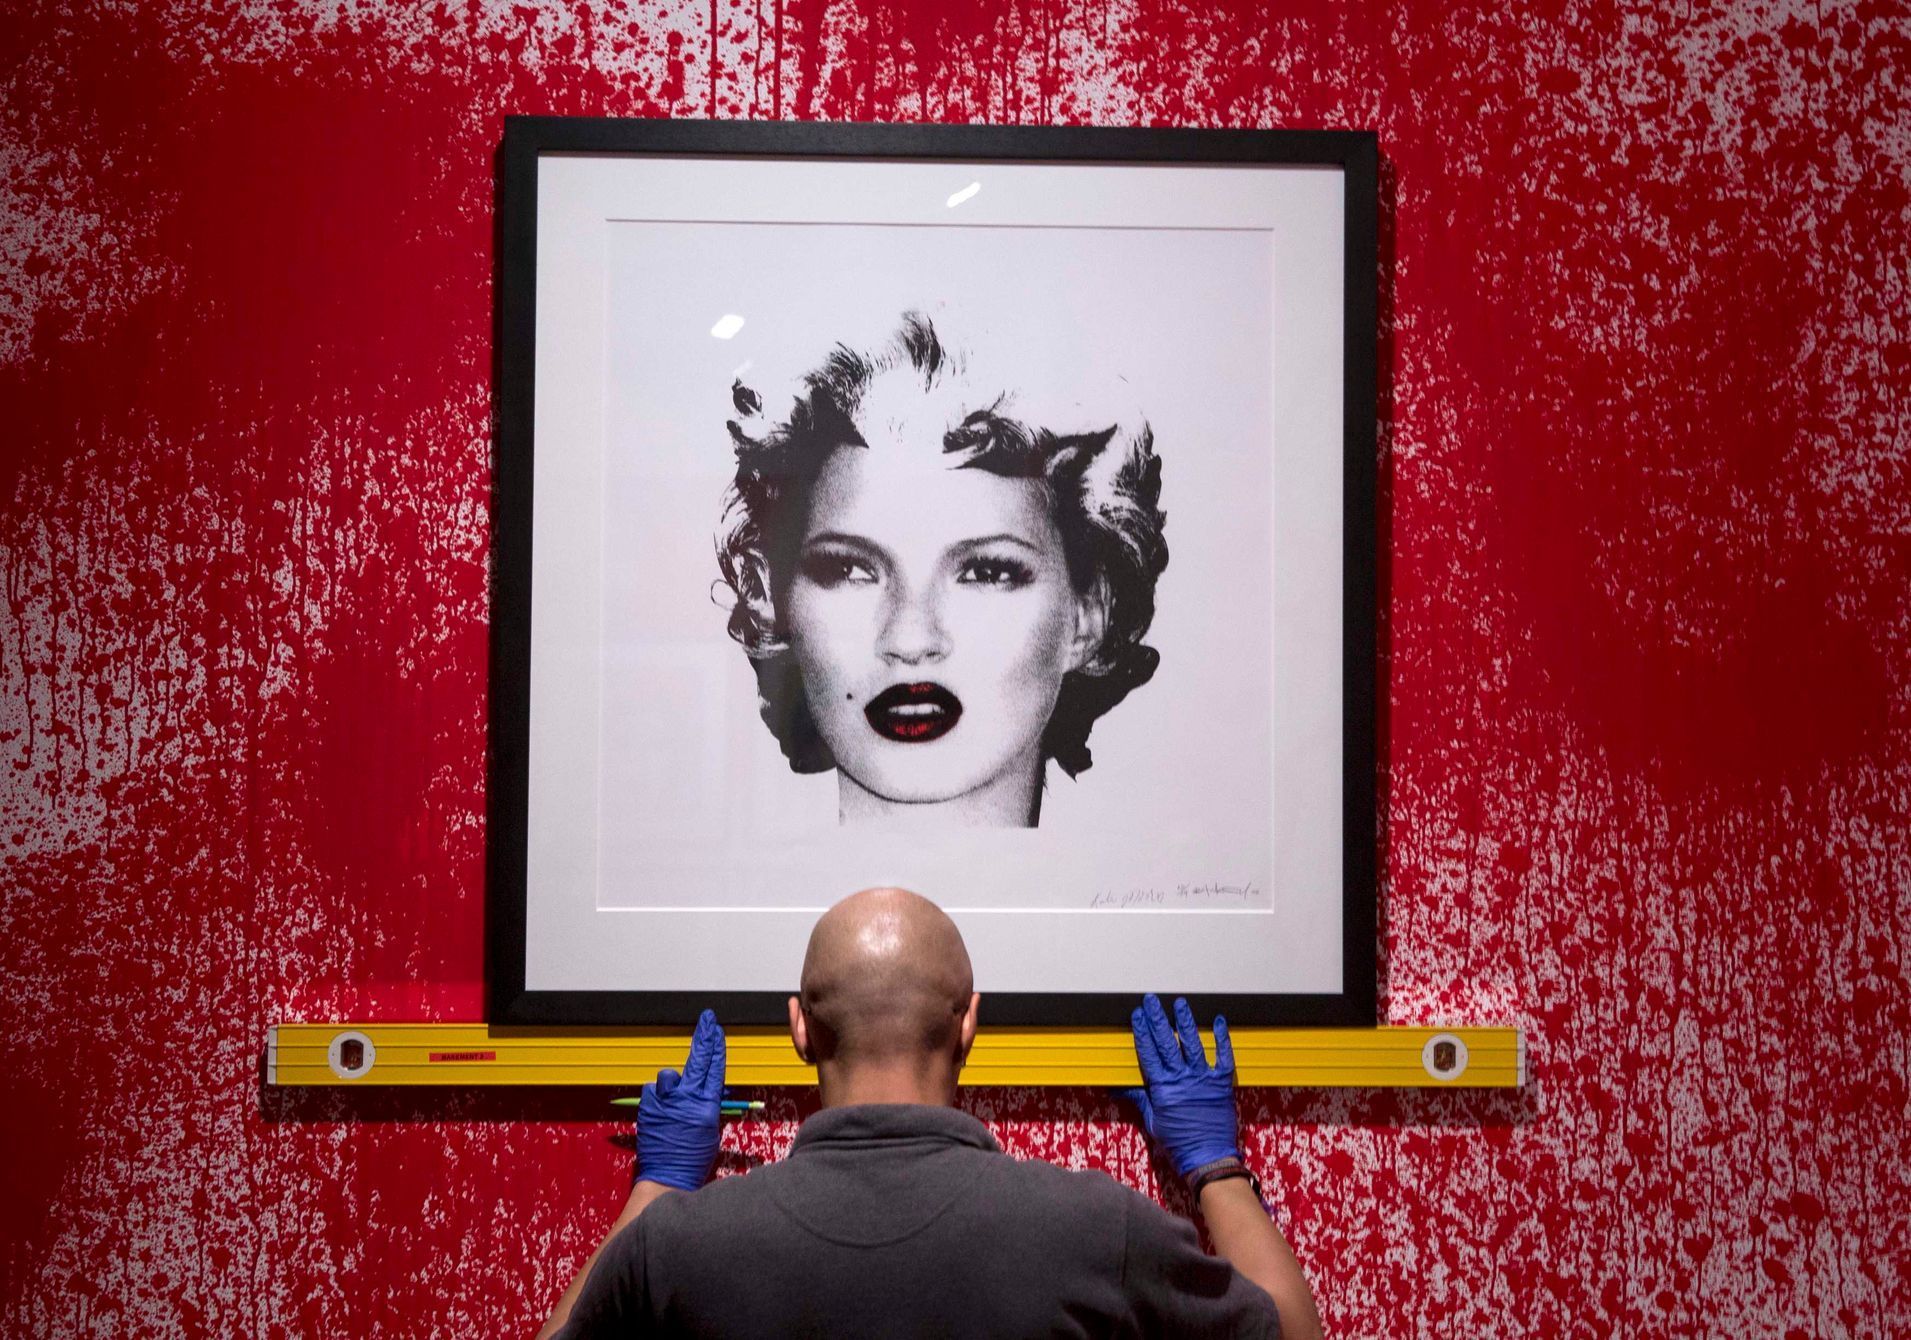 A gallery assistant hangs work depicting Kate Moss at the Banksy: The Unauthorised Retrospective exhibition at Sotheby's S2 Gallery in London